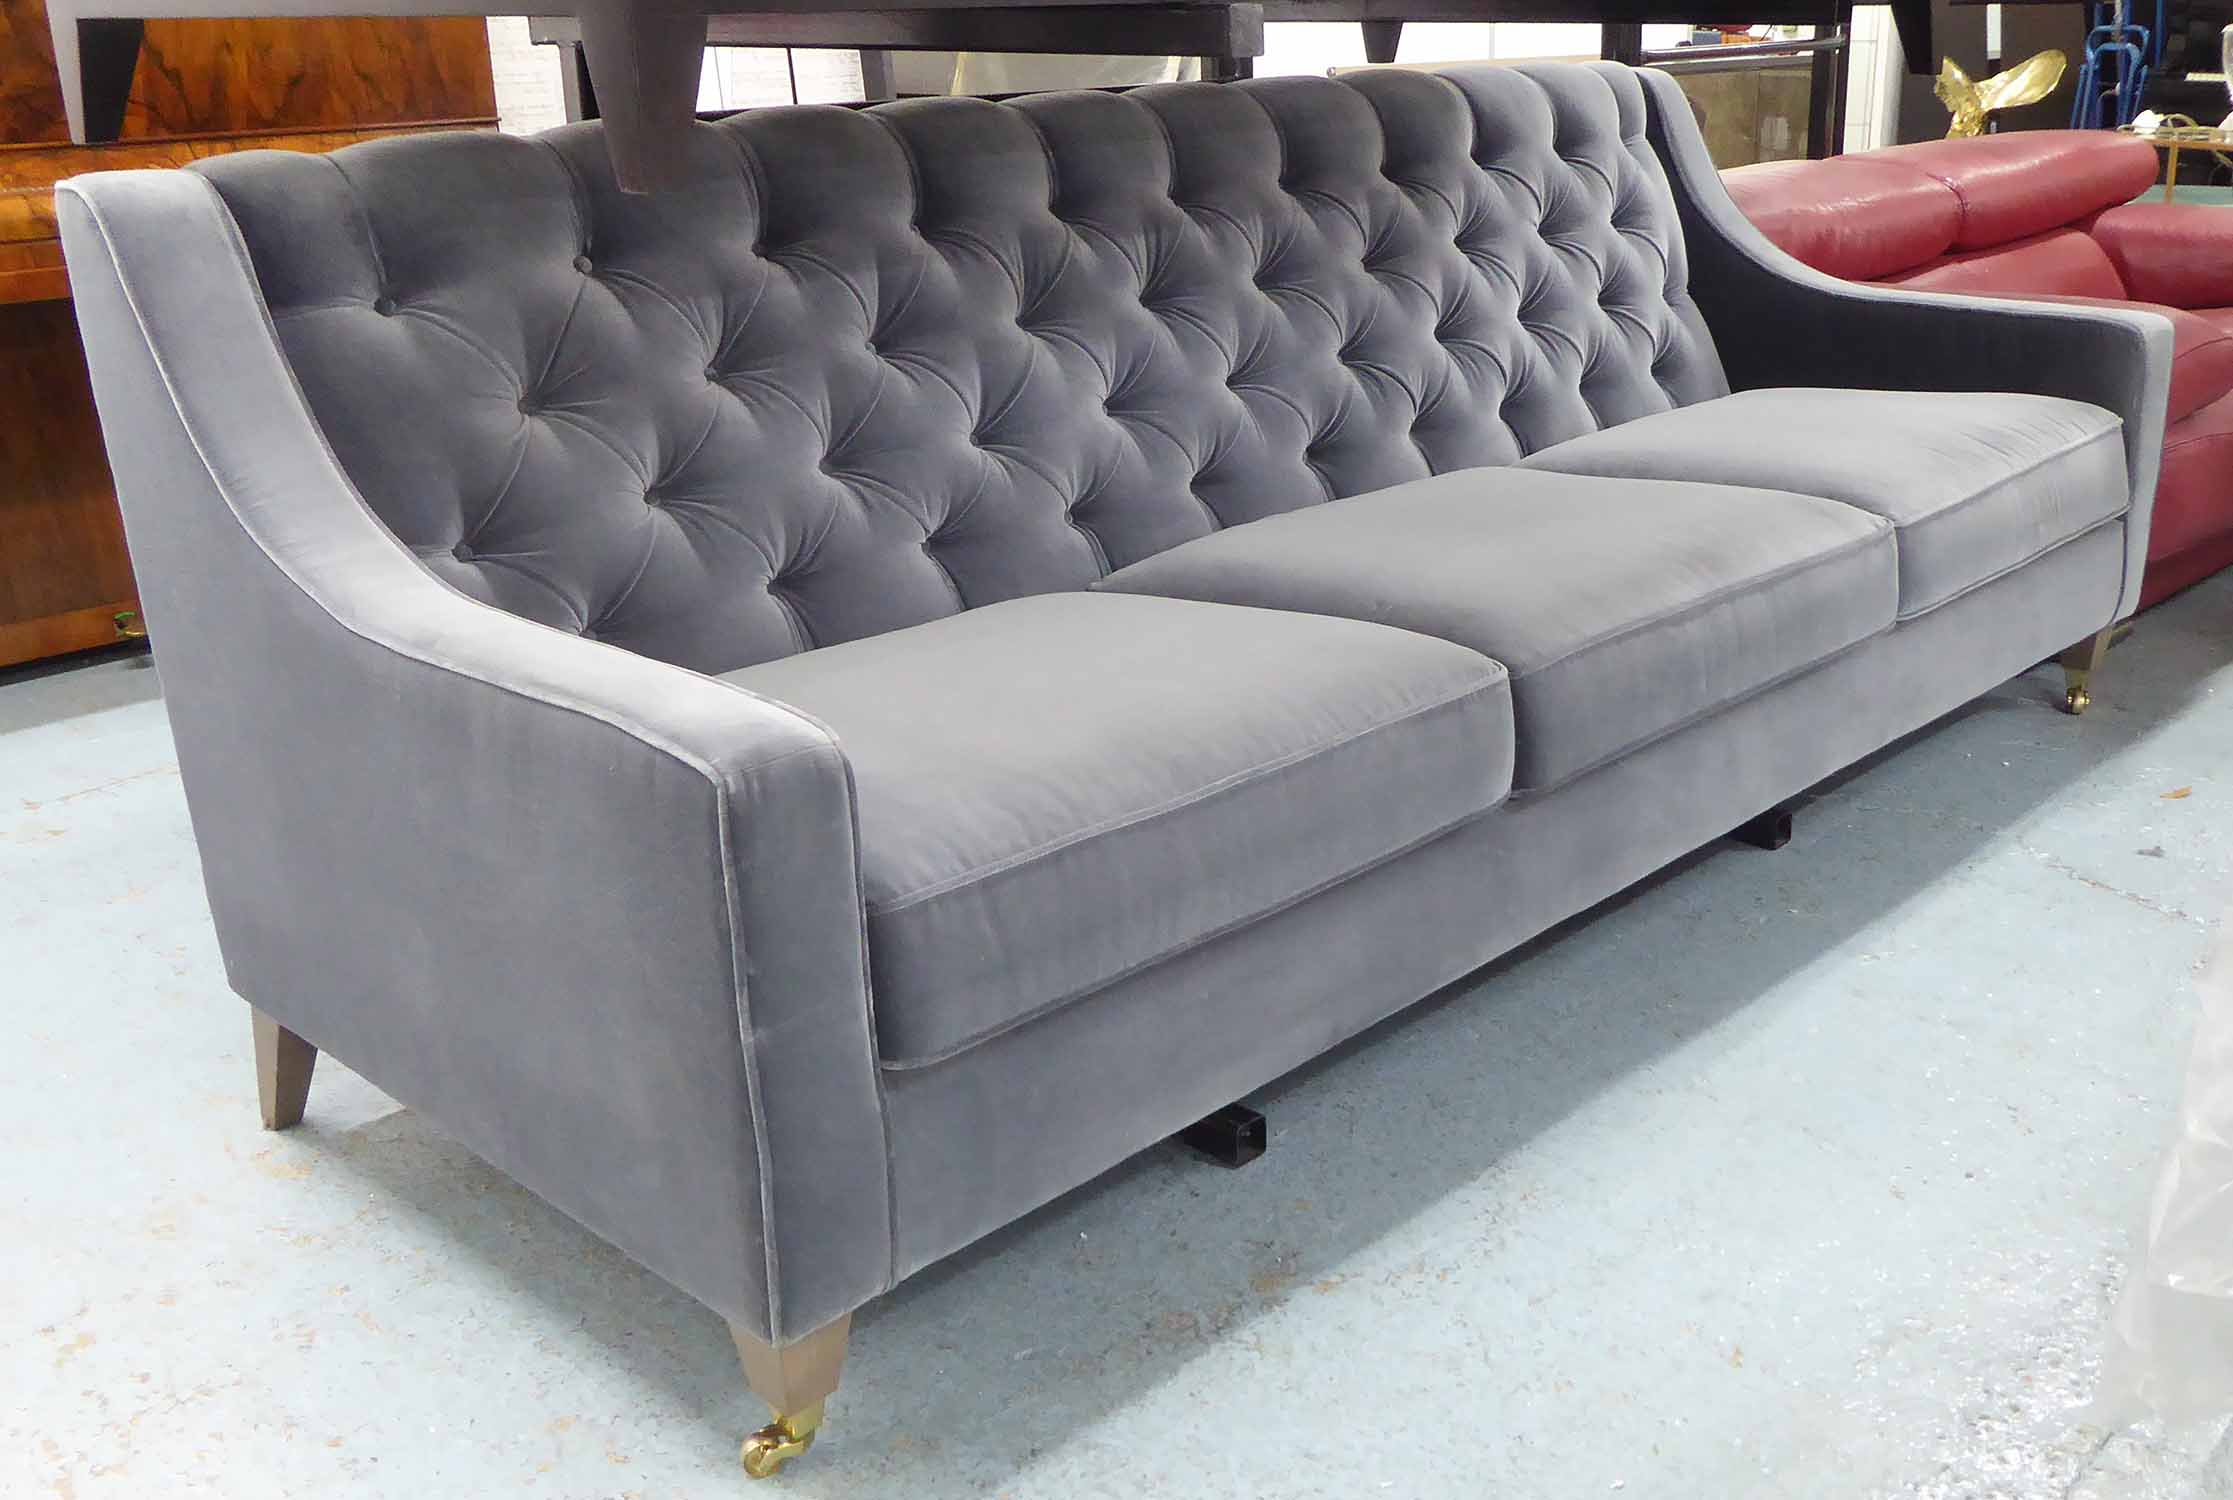 SOFA, three seater, in grey button back velvet, on square castor support, 240cm L.